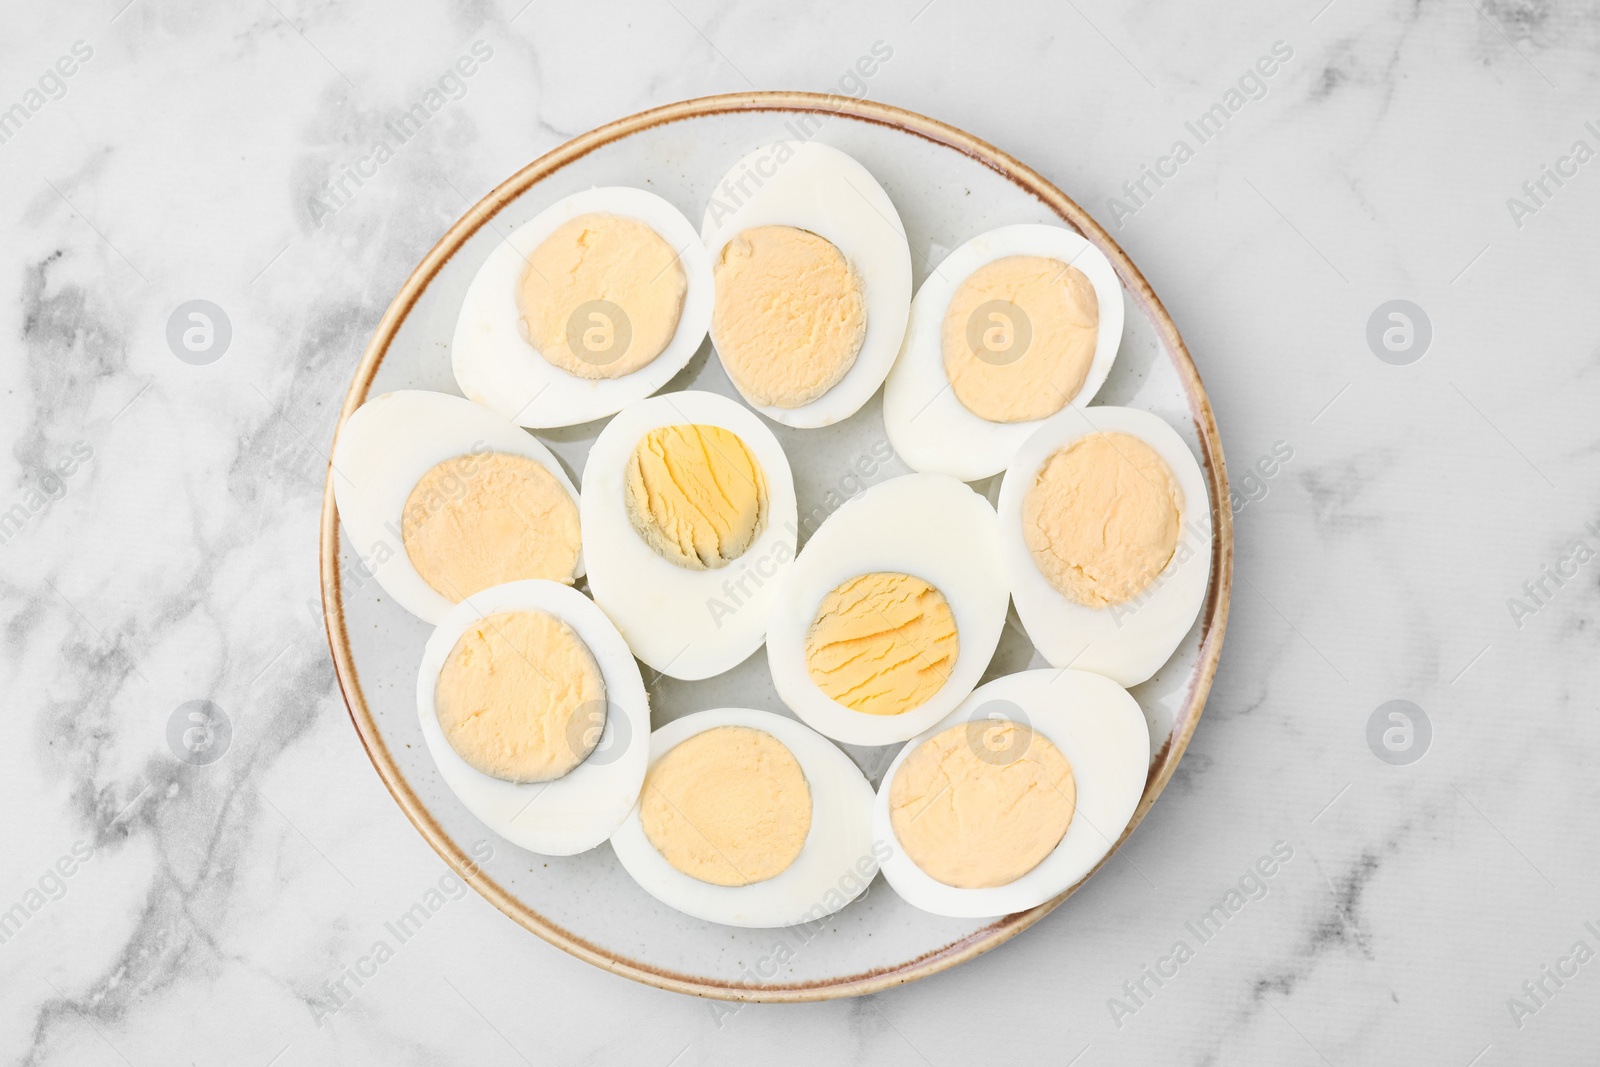 Photo of Fresh hard boiled eggs on white marble table, top view